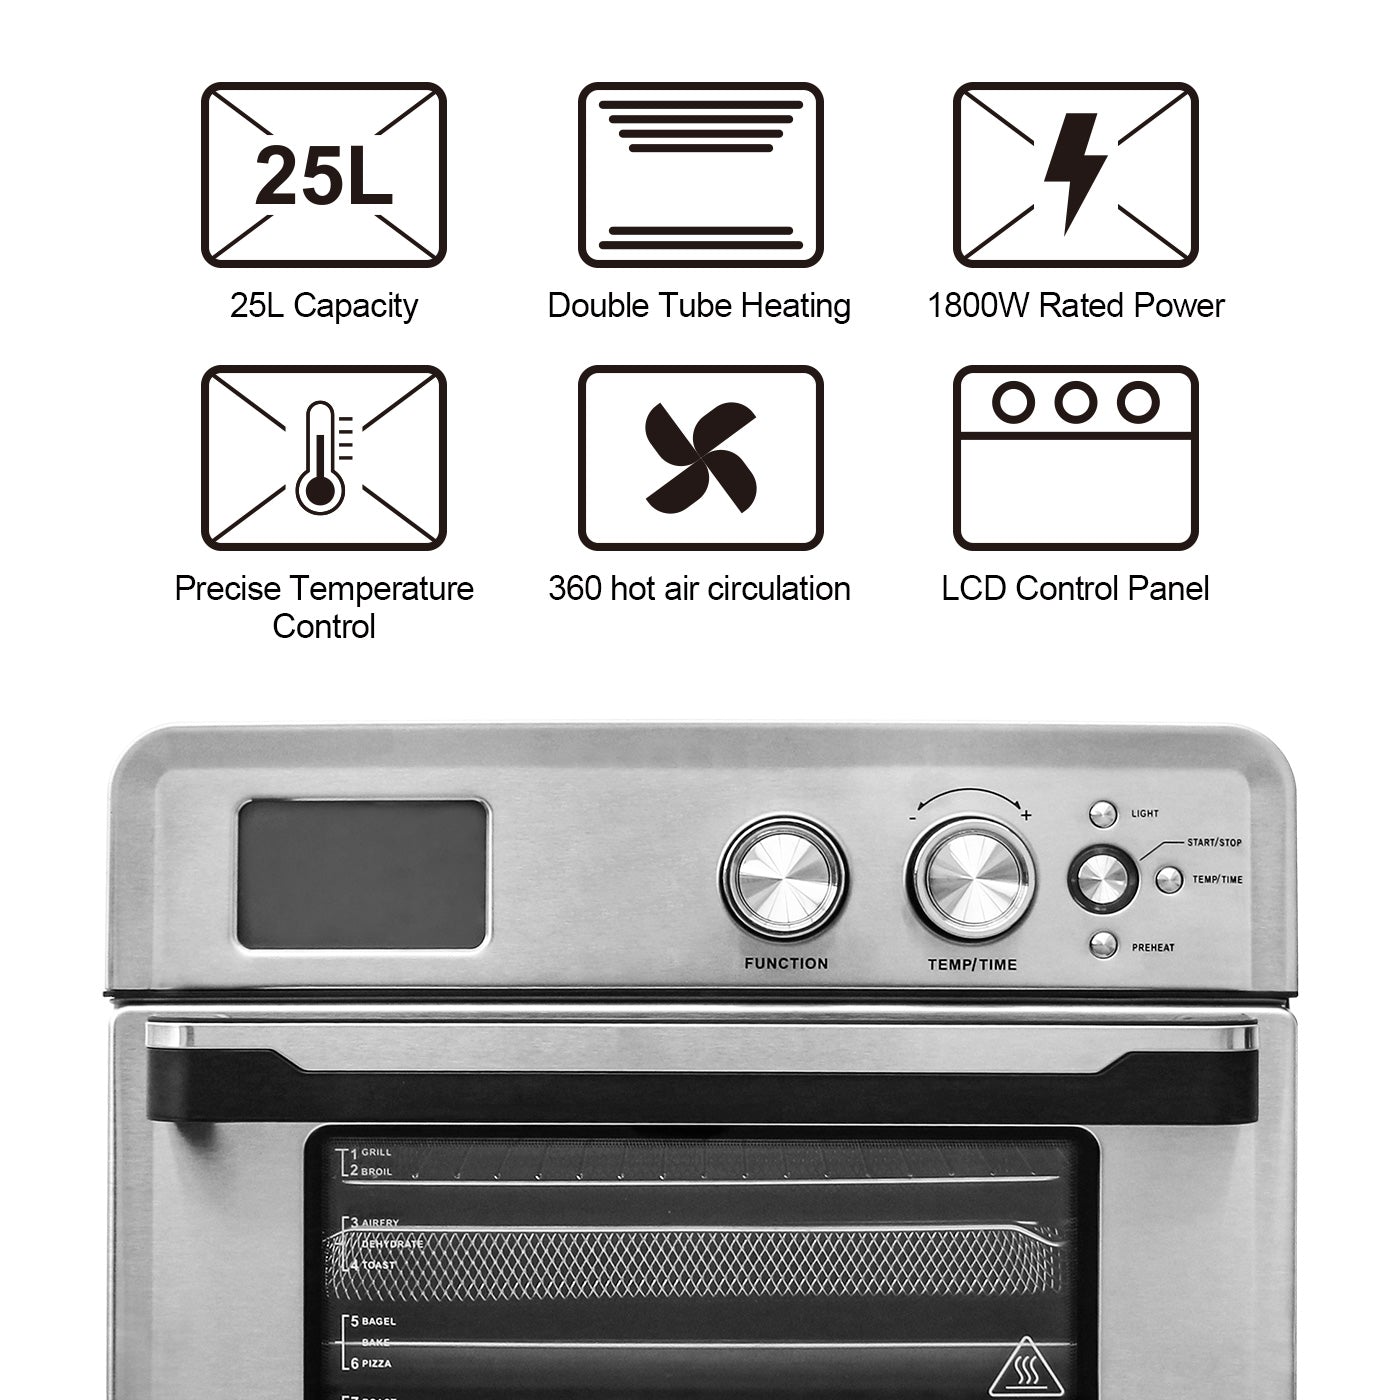 LCD Display Controlled Air Fryer Convection Oven - Stainless Steel 26.4 QT with 21 Preset Cooking Menu